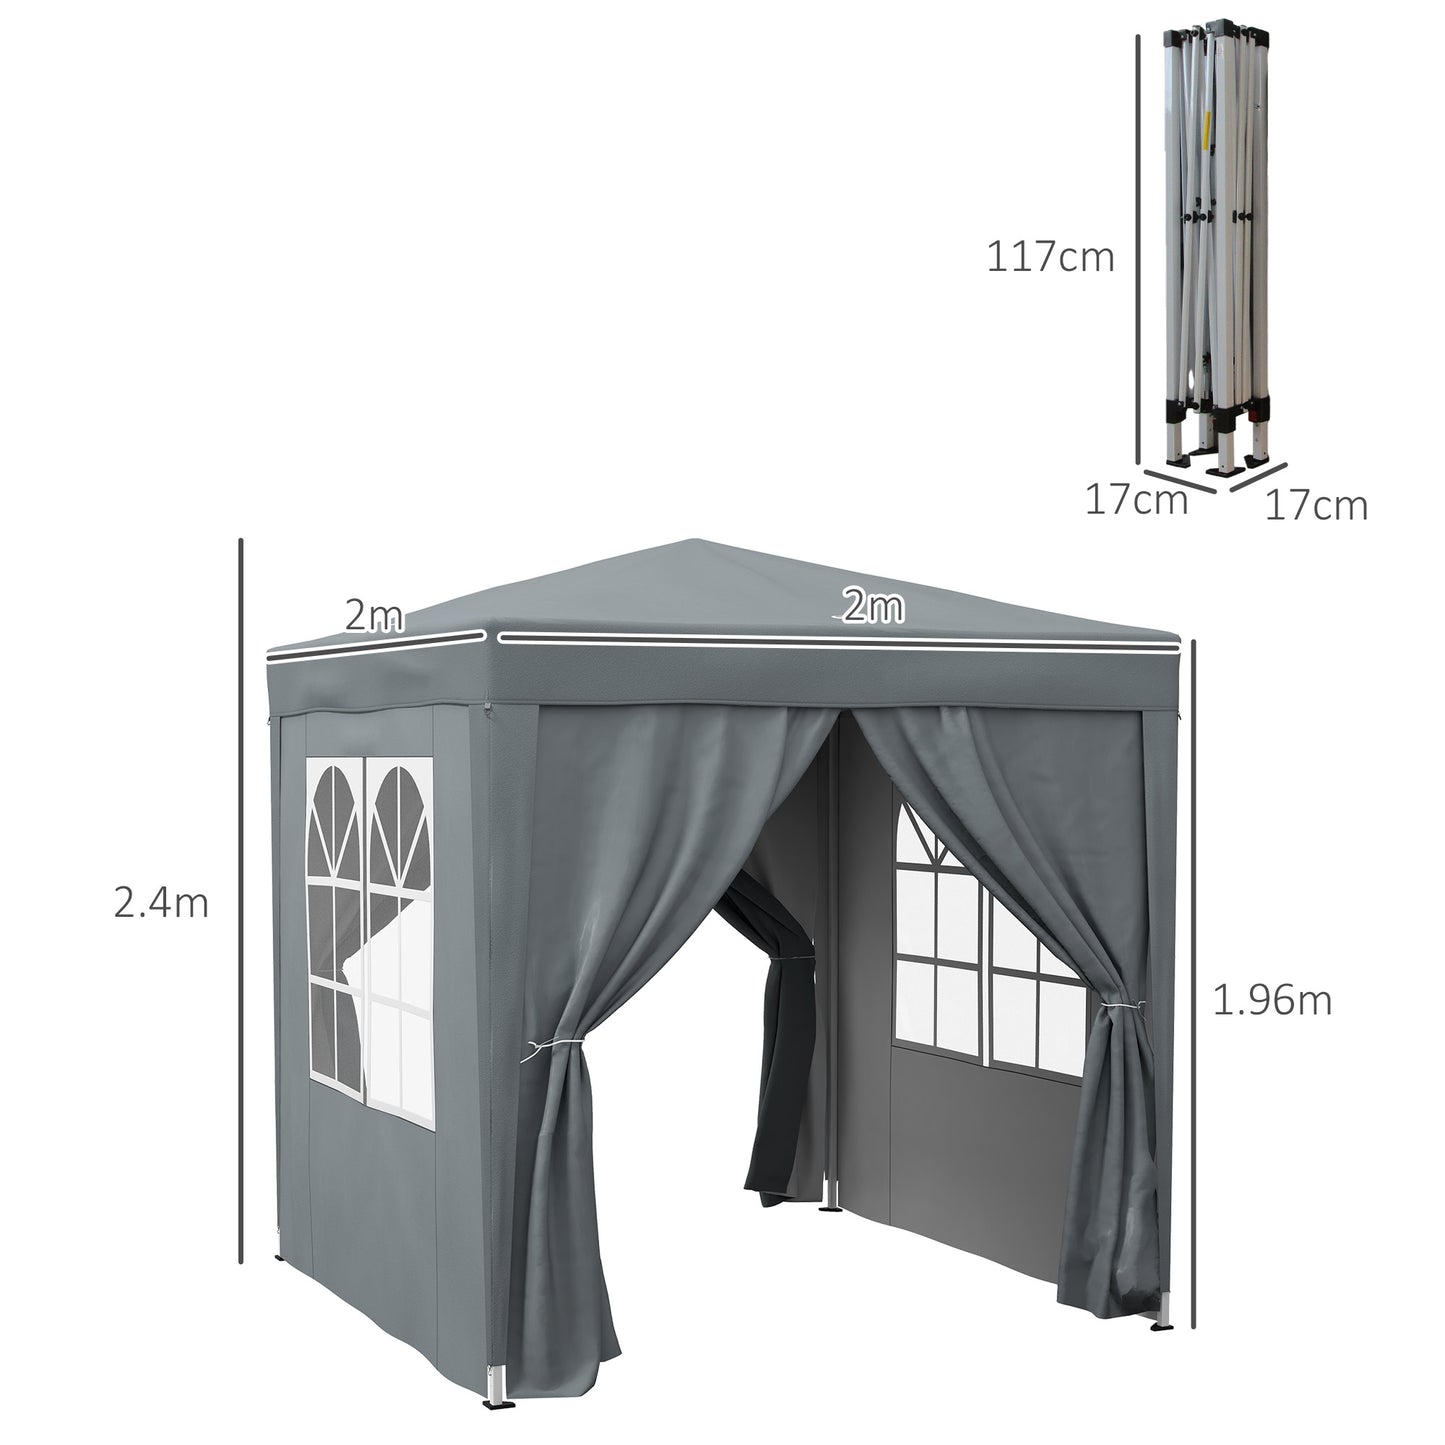 Outsunny Garden Pop Up Gazebo Marquee Party Tent Canopy with free Carrying Case, Removable 2 Walls, 2 Windows, 2m x 2m, Grey